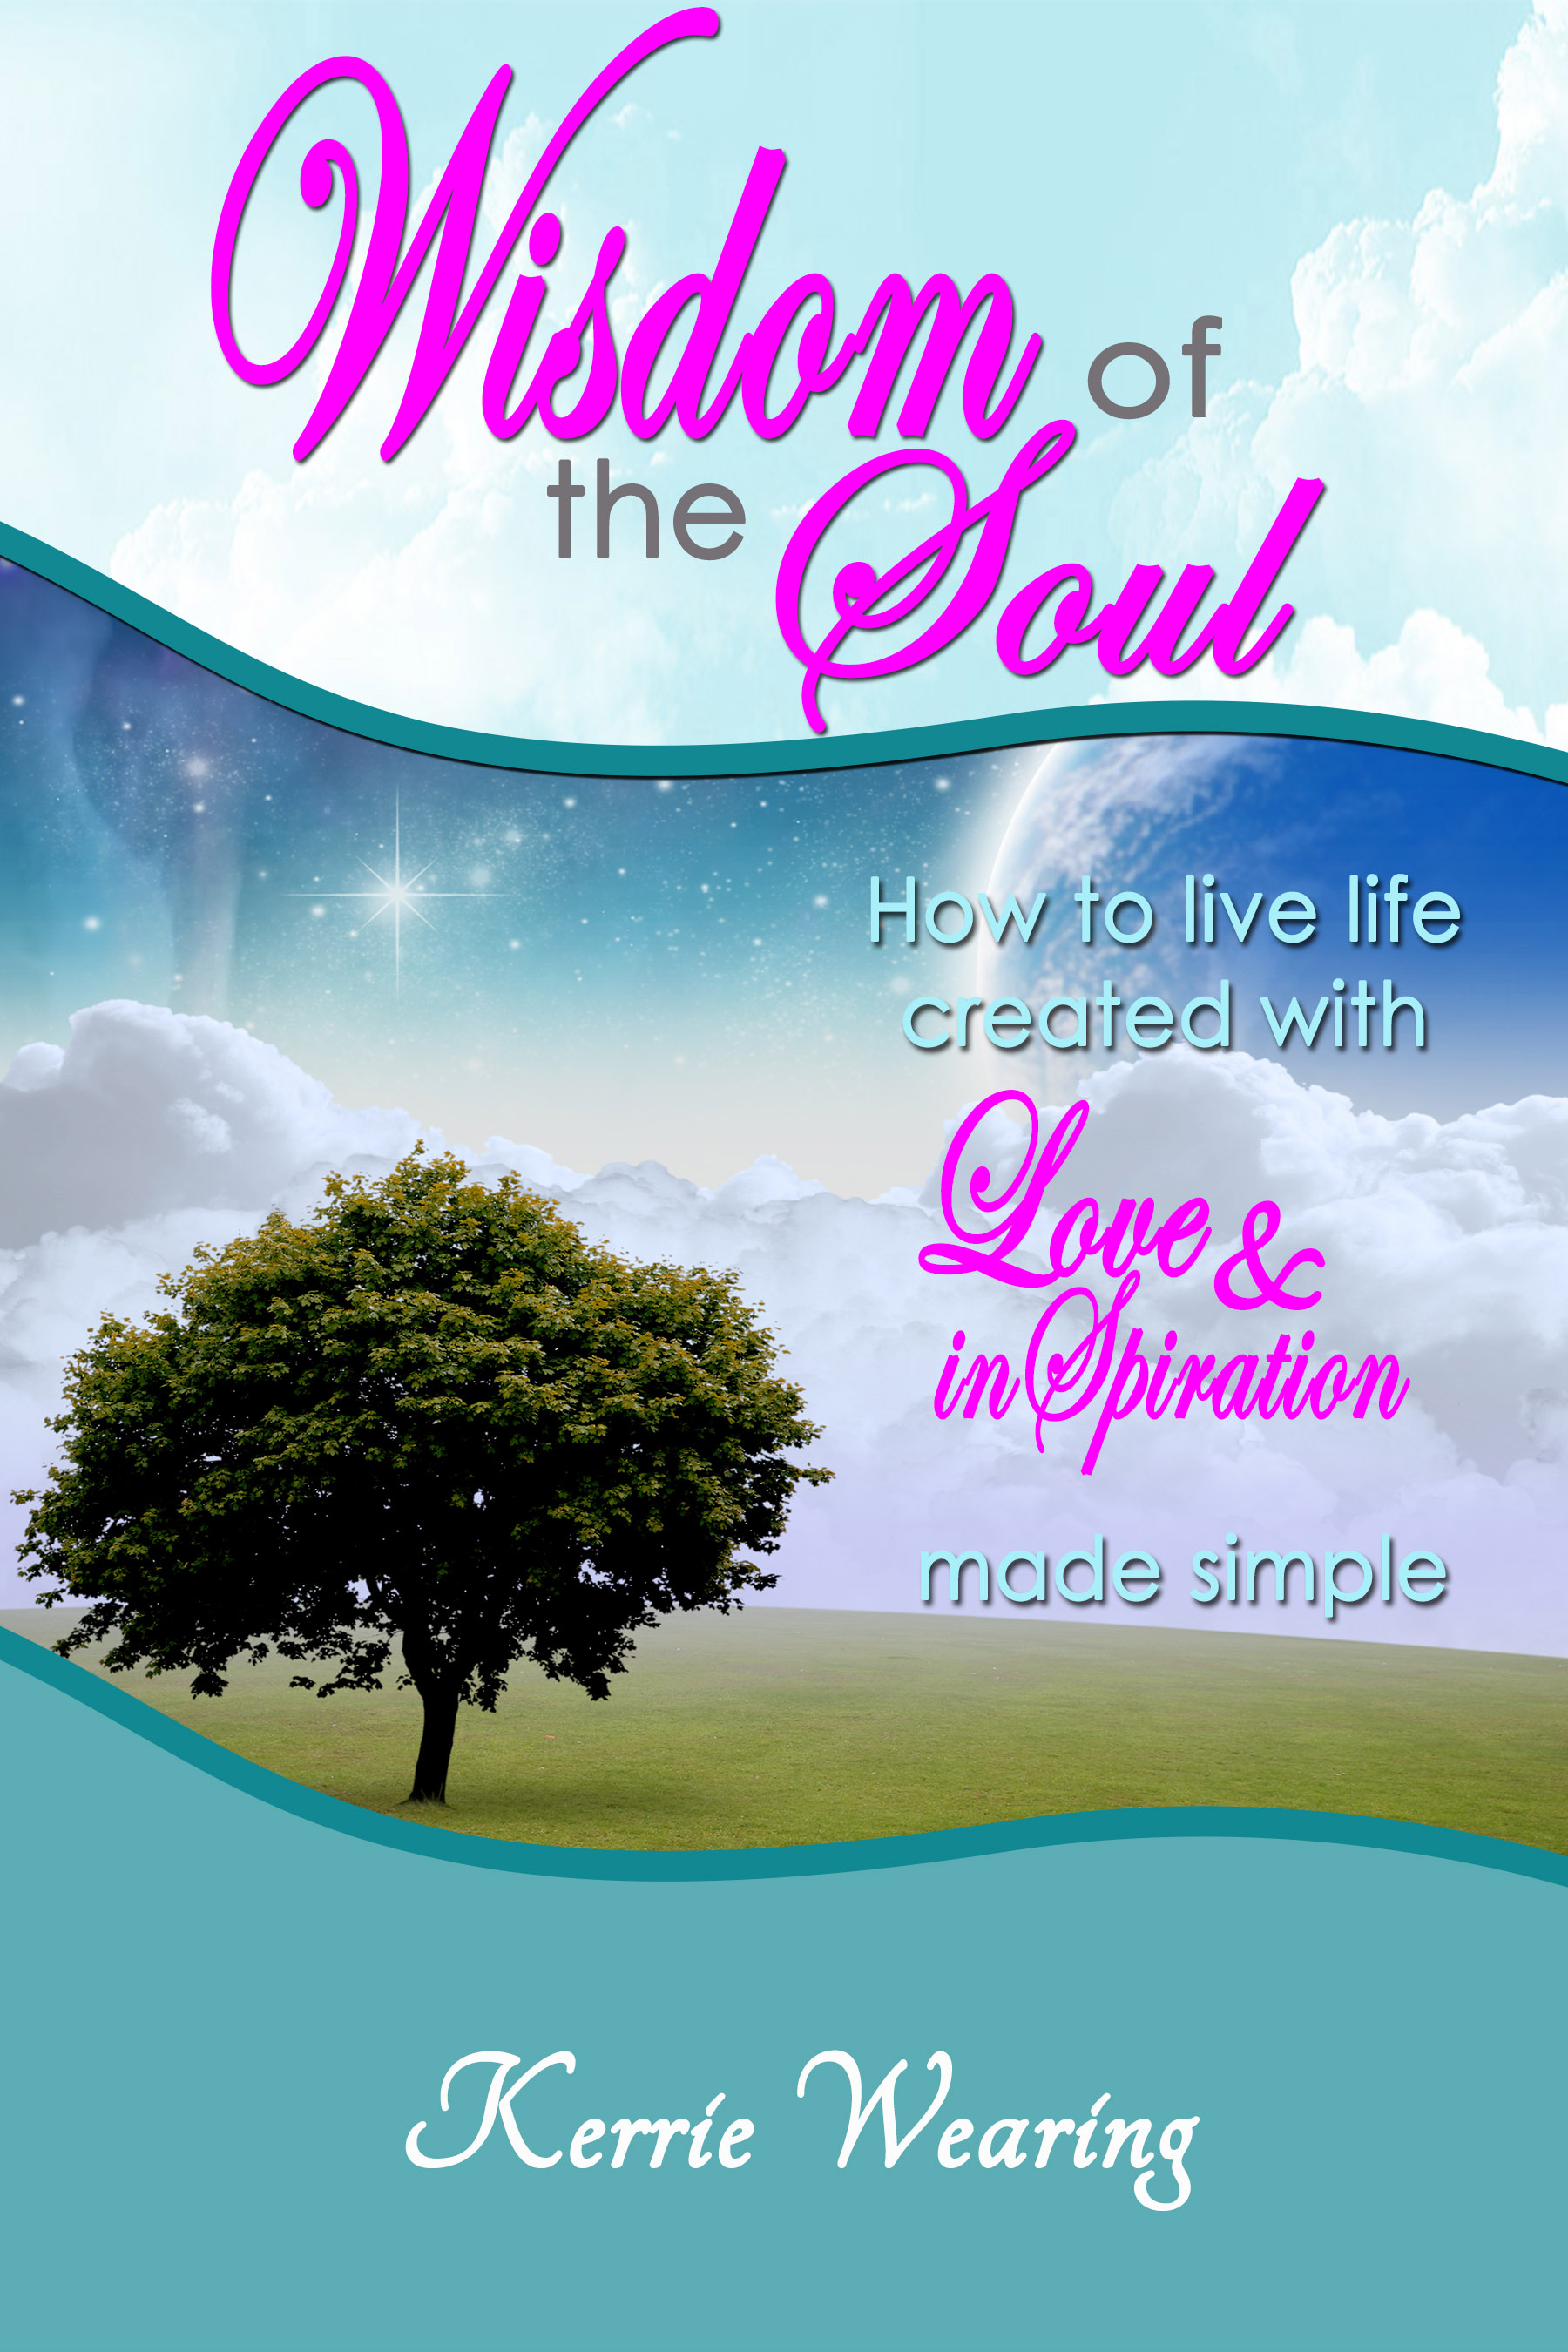 WOOHOO! Wisdom of the Soul is now available for pre-orders